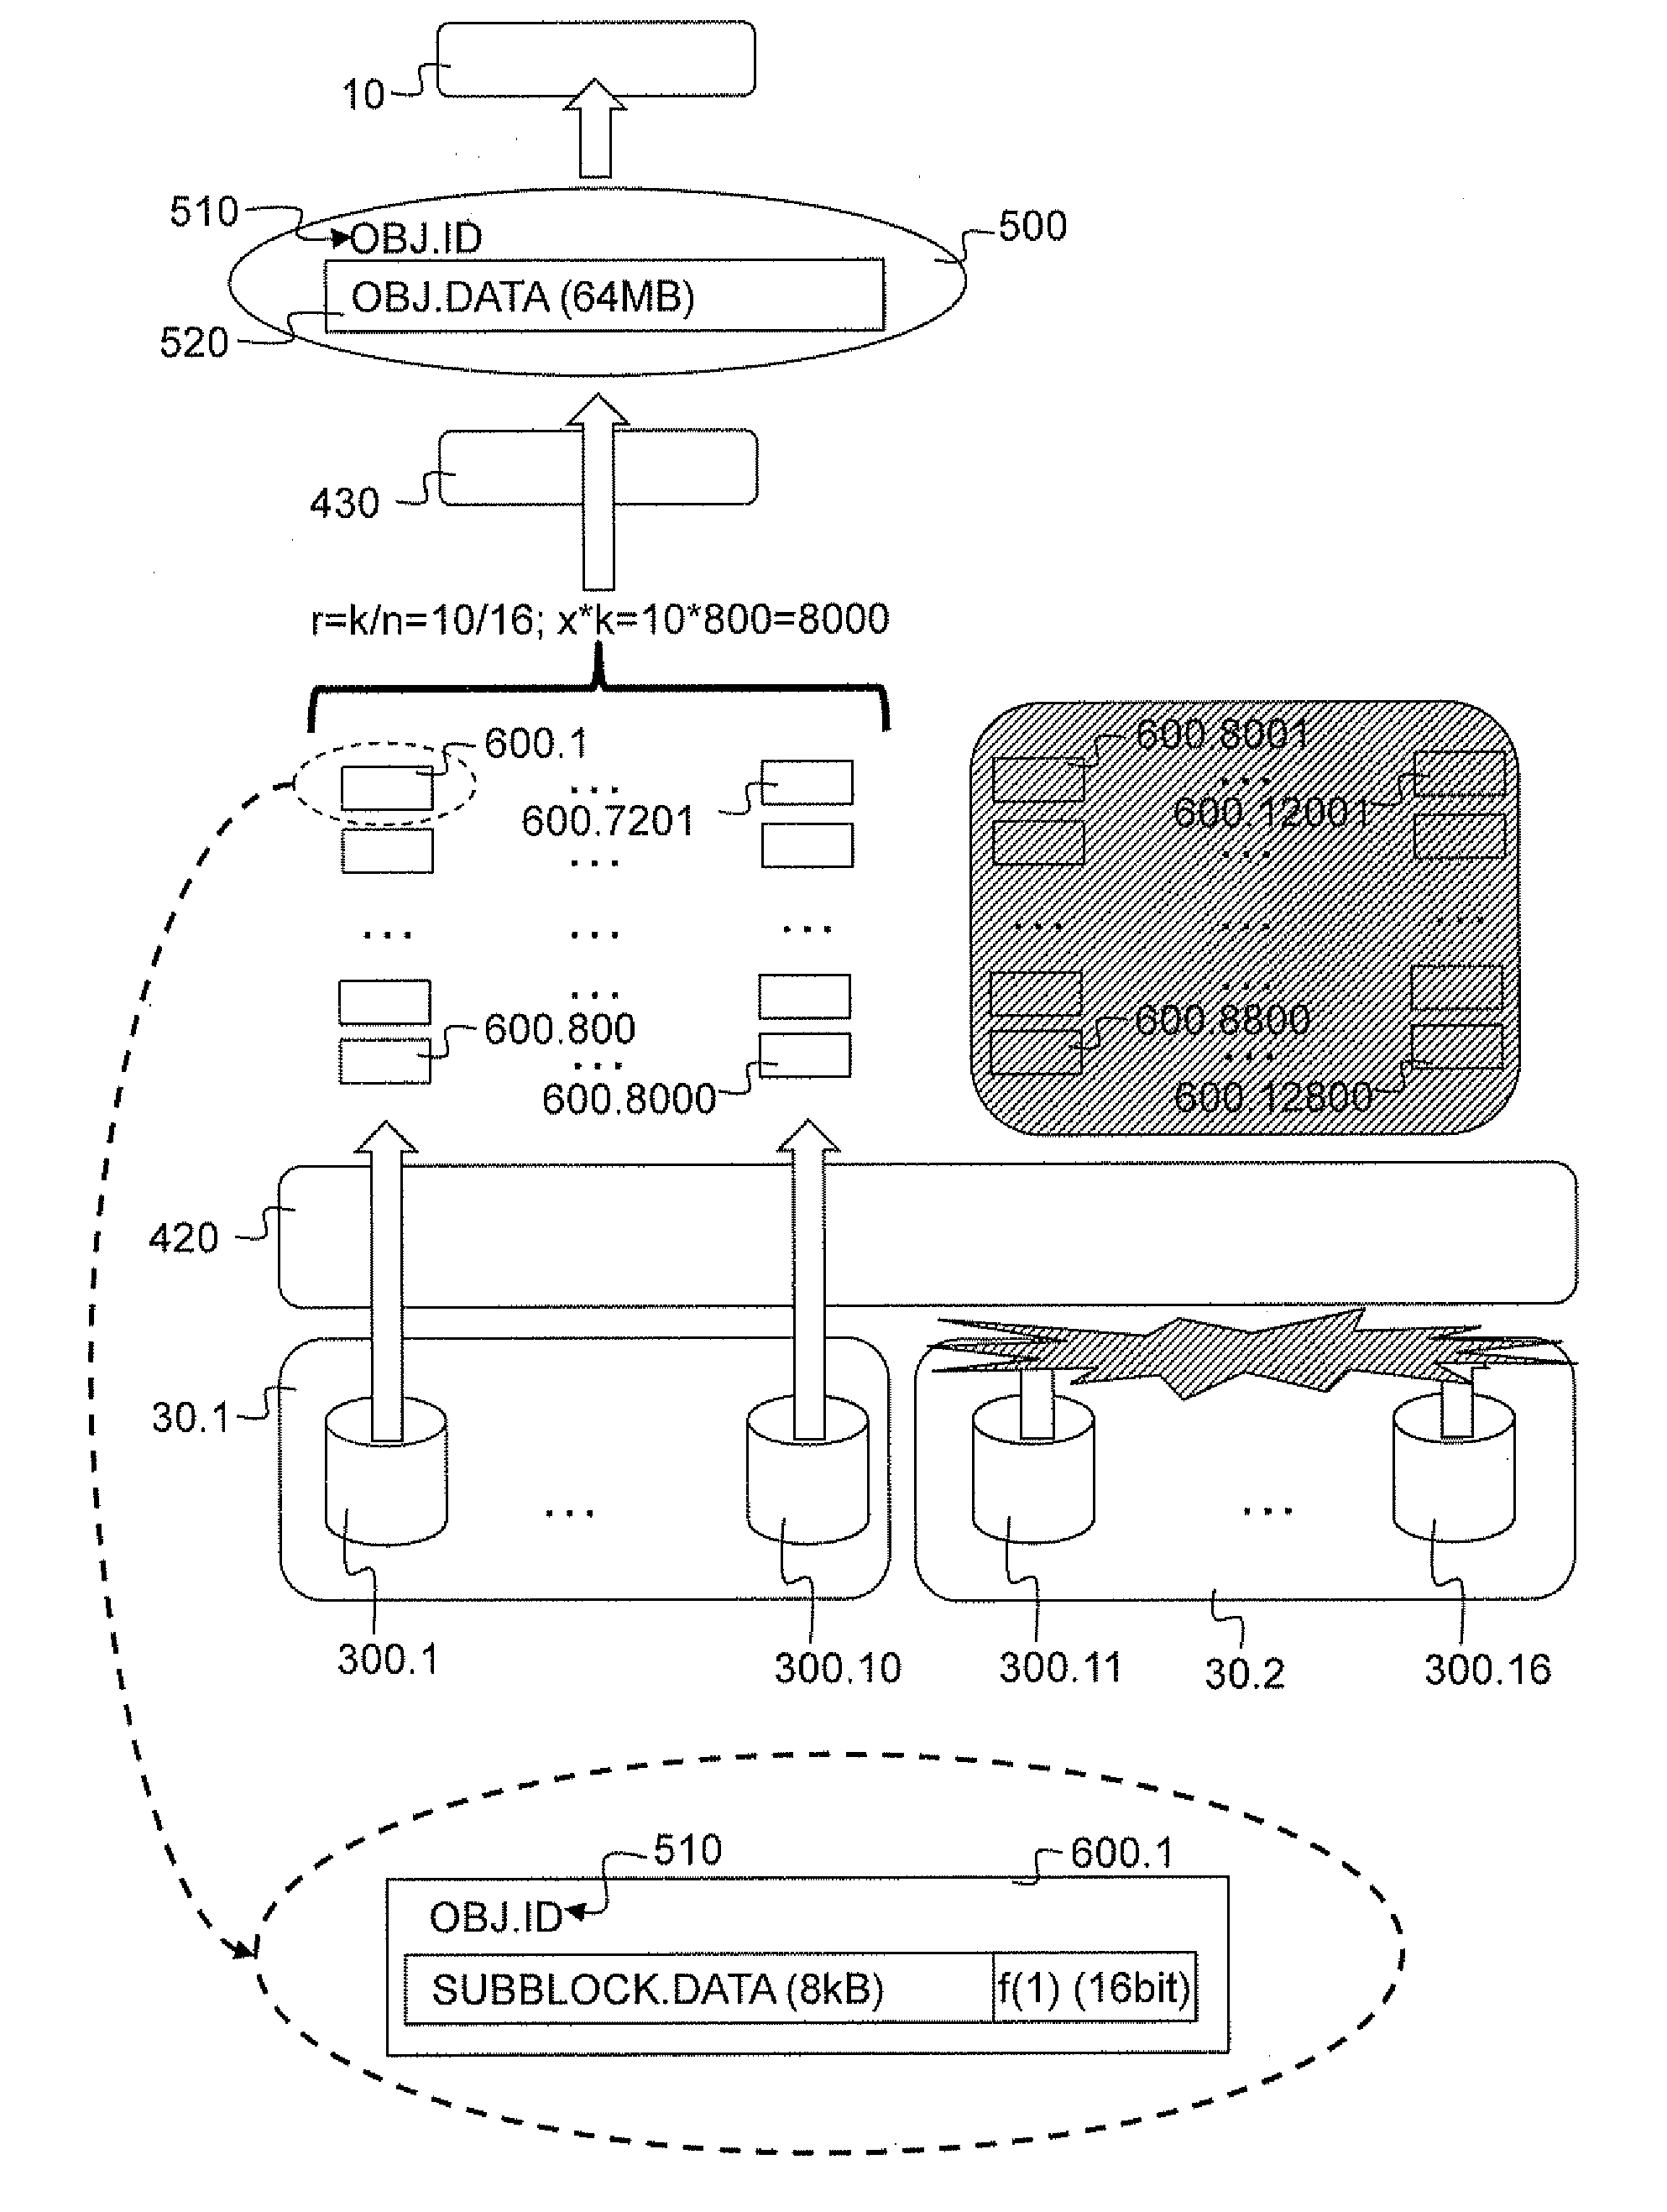 Hierarchical, distributed object storage system